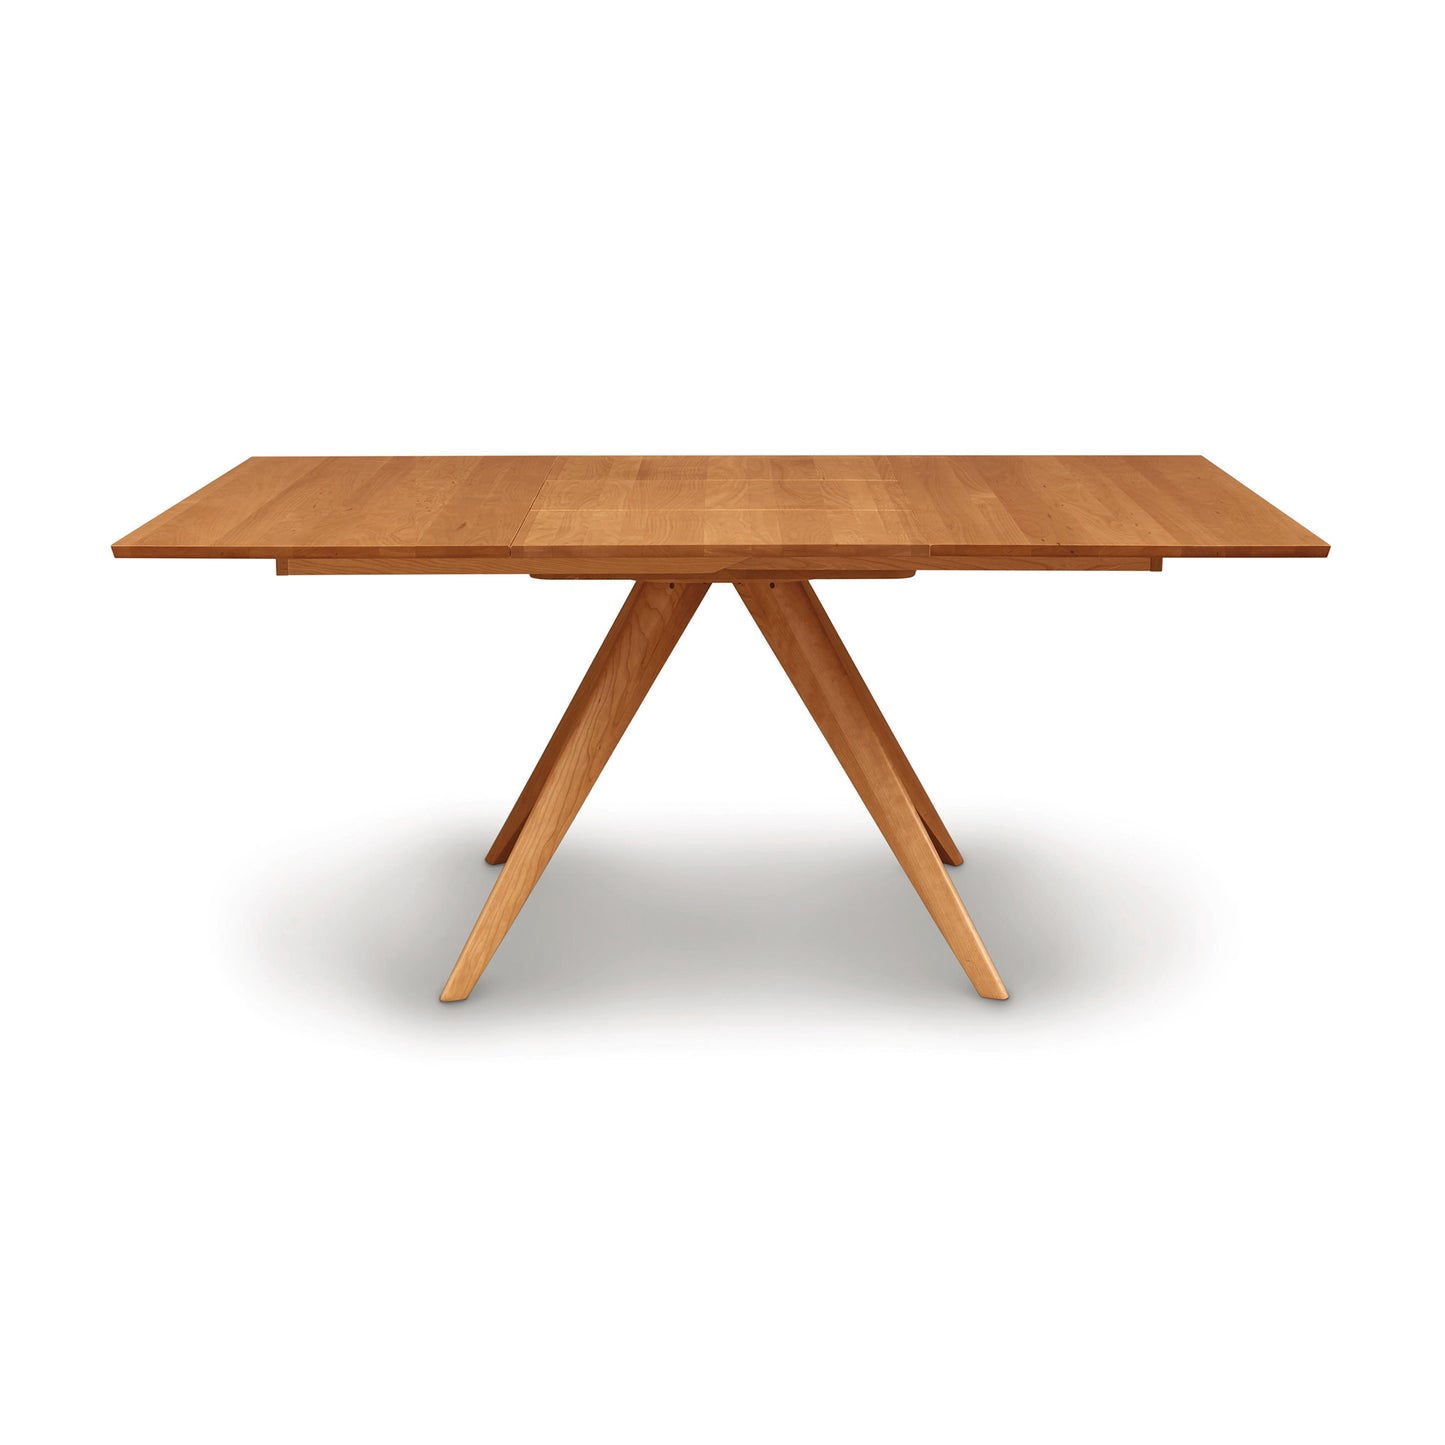 A Copeland Furniture Catalina Square Extension Dining Table with a rectangular top and a central supporting leg that splits into a four-point base, made from sustainably harvested wood, isolated on a white background.